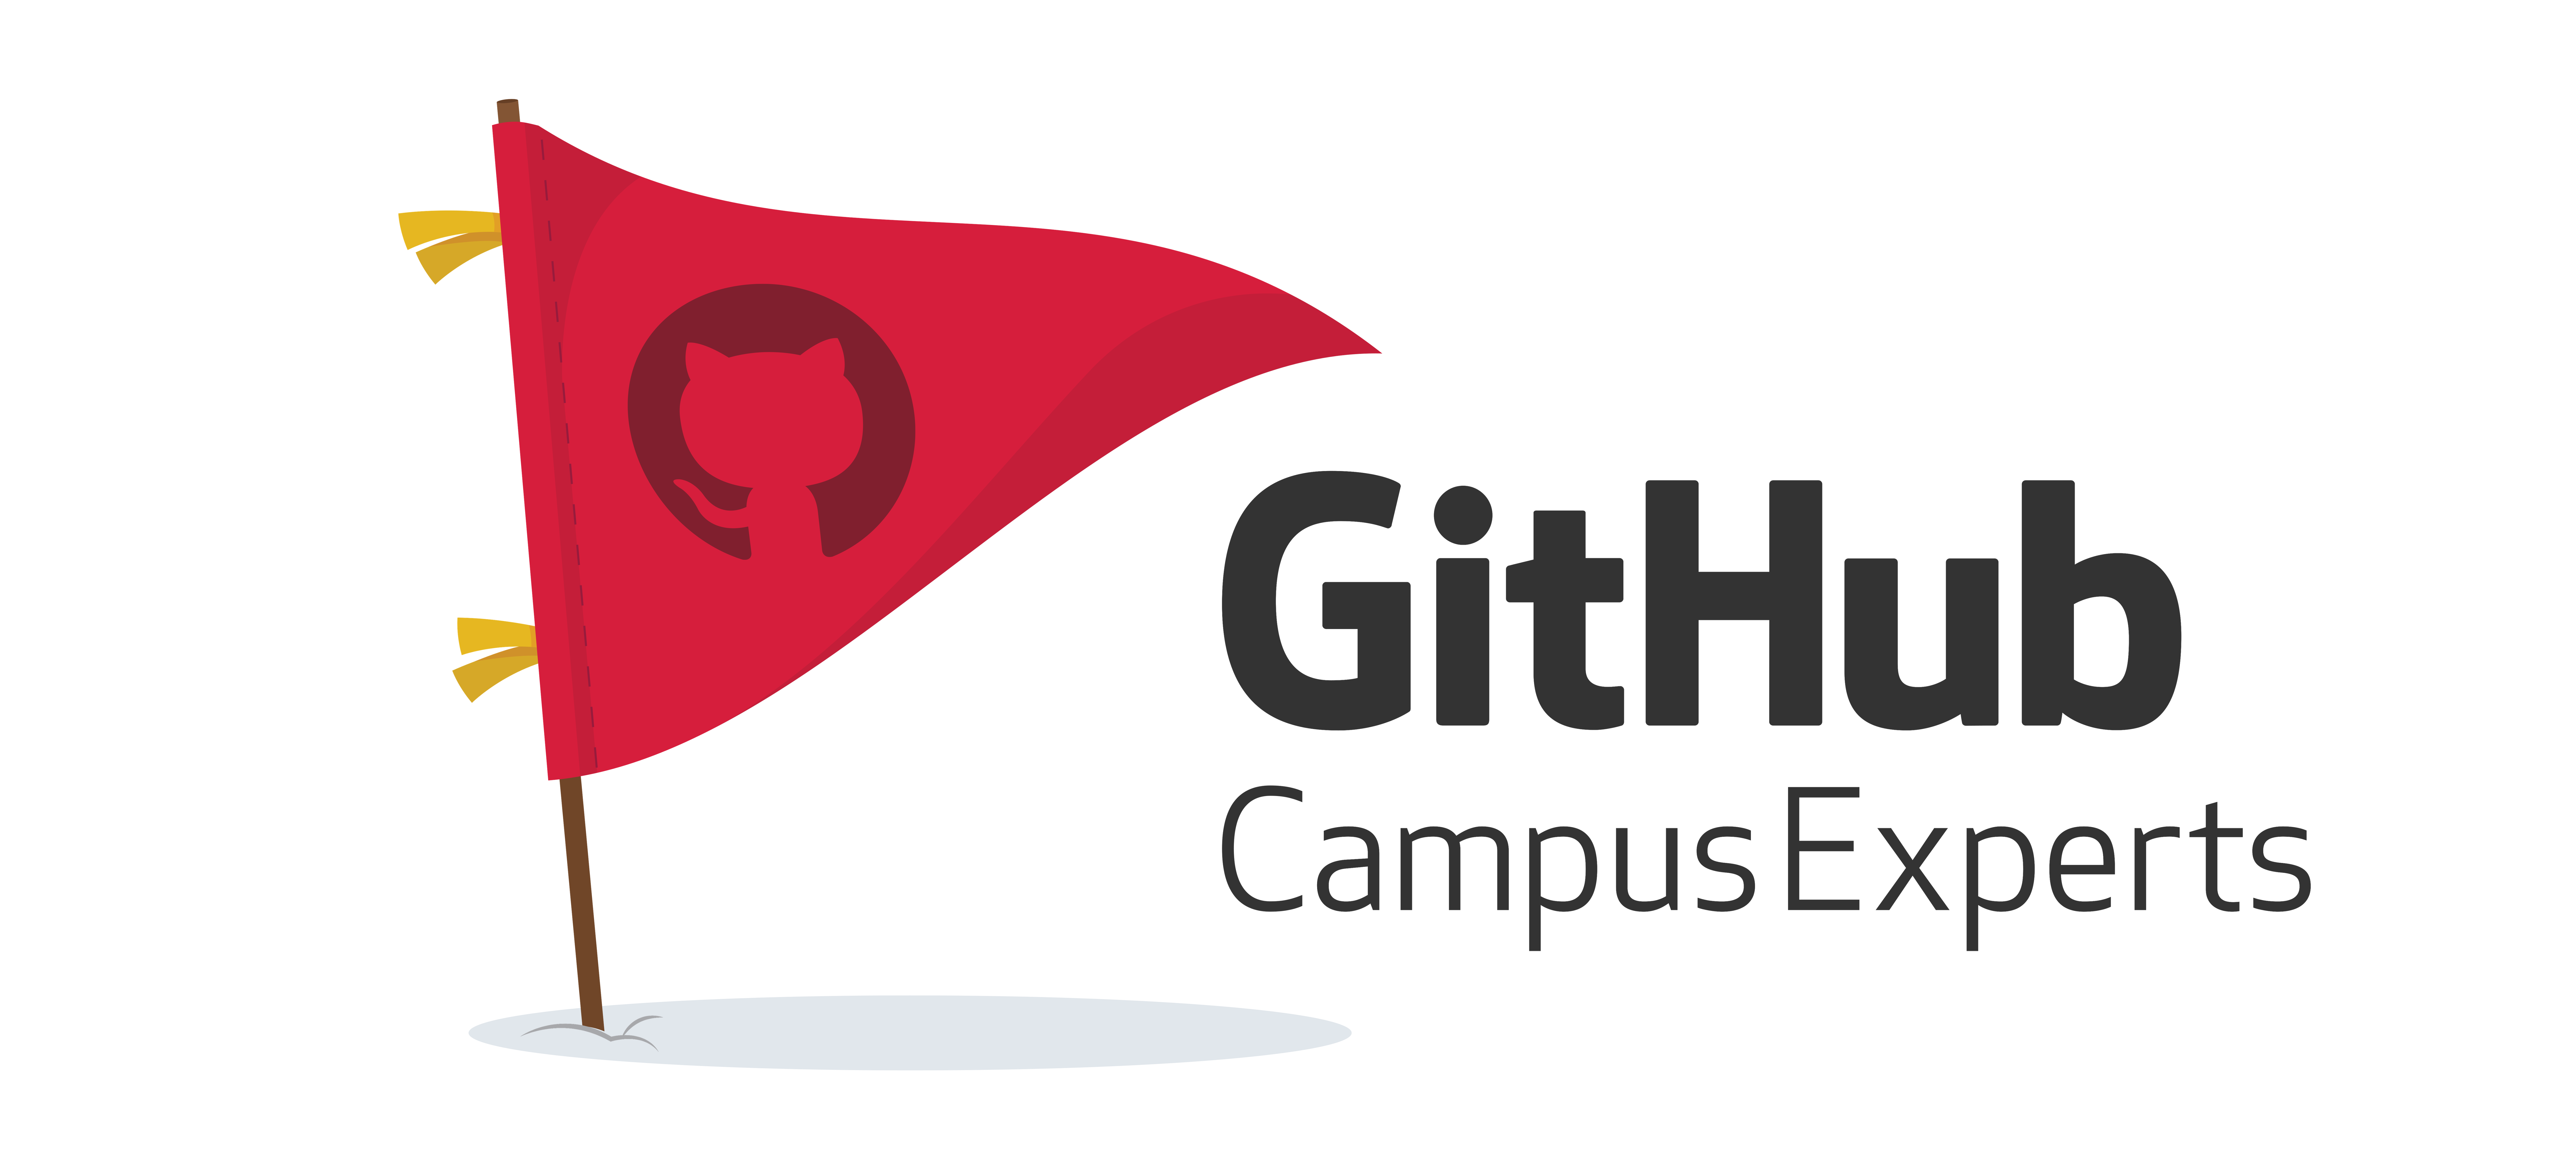 github-education-illustration-campus-experts.png